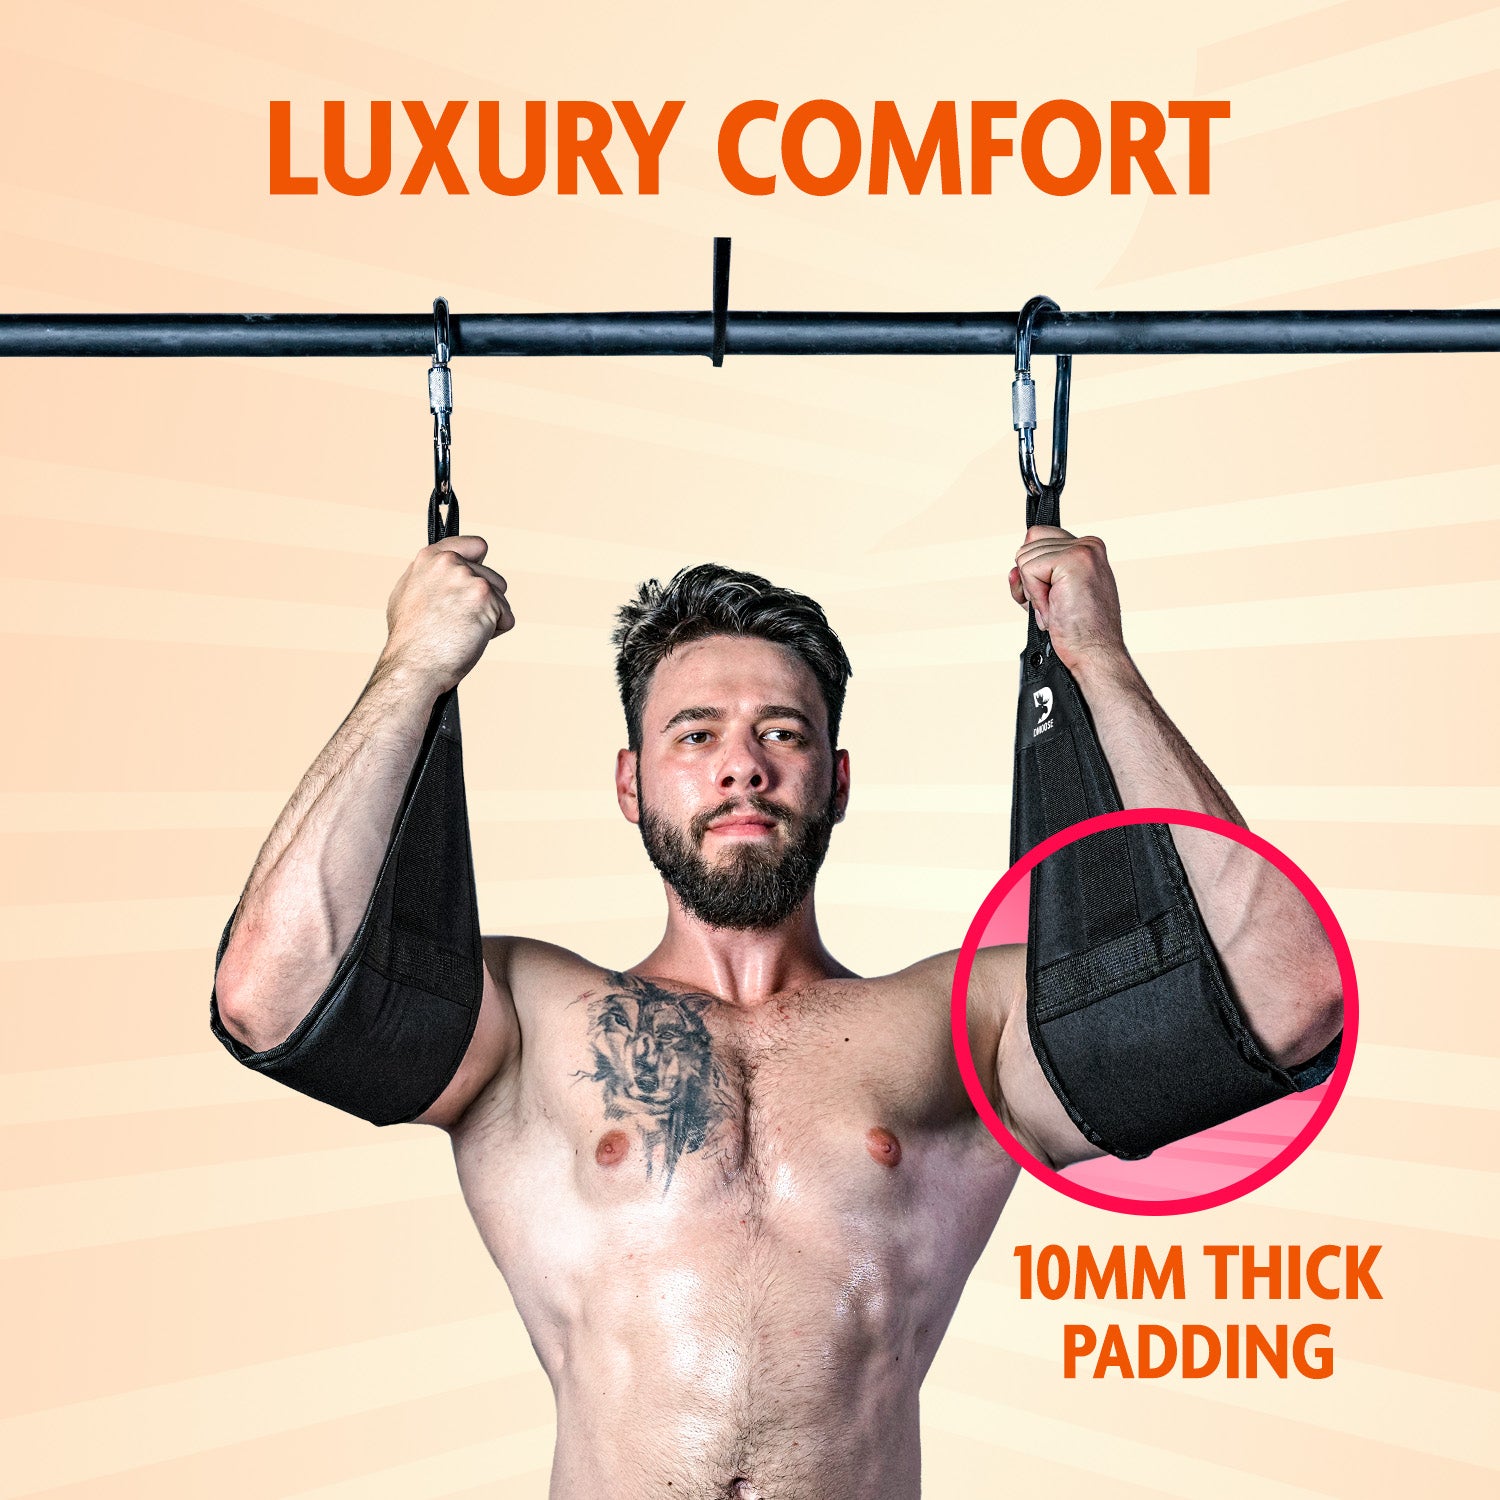 Transform Your Workouts with DMoose Premium Hanging Ab Straps!